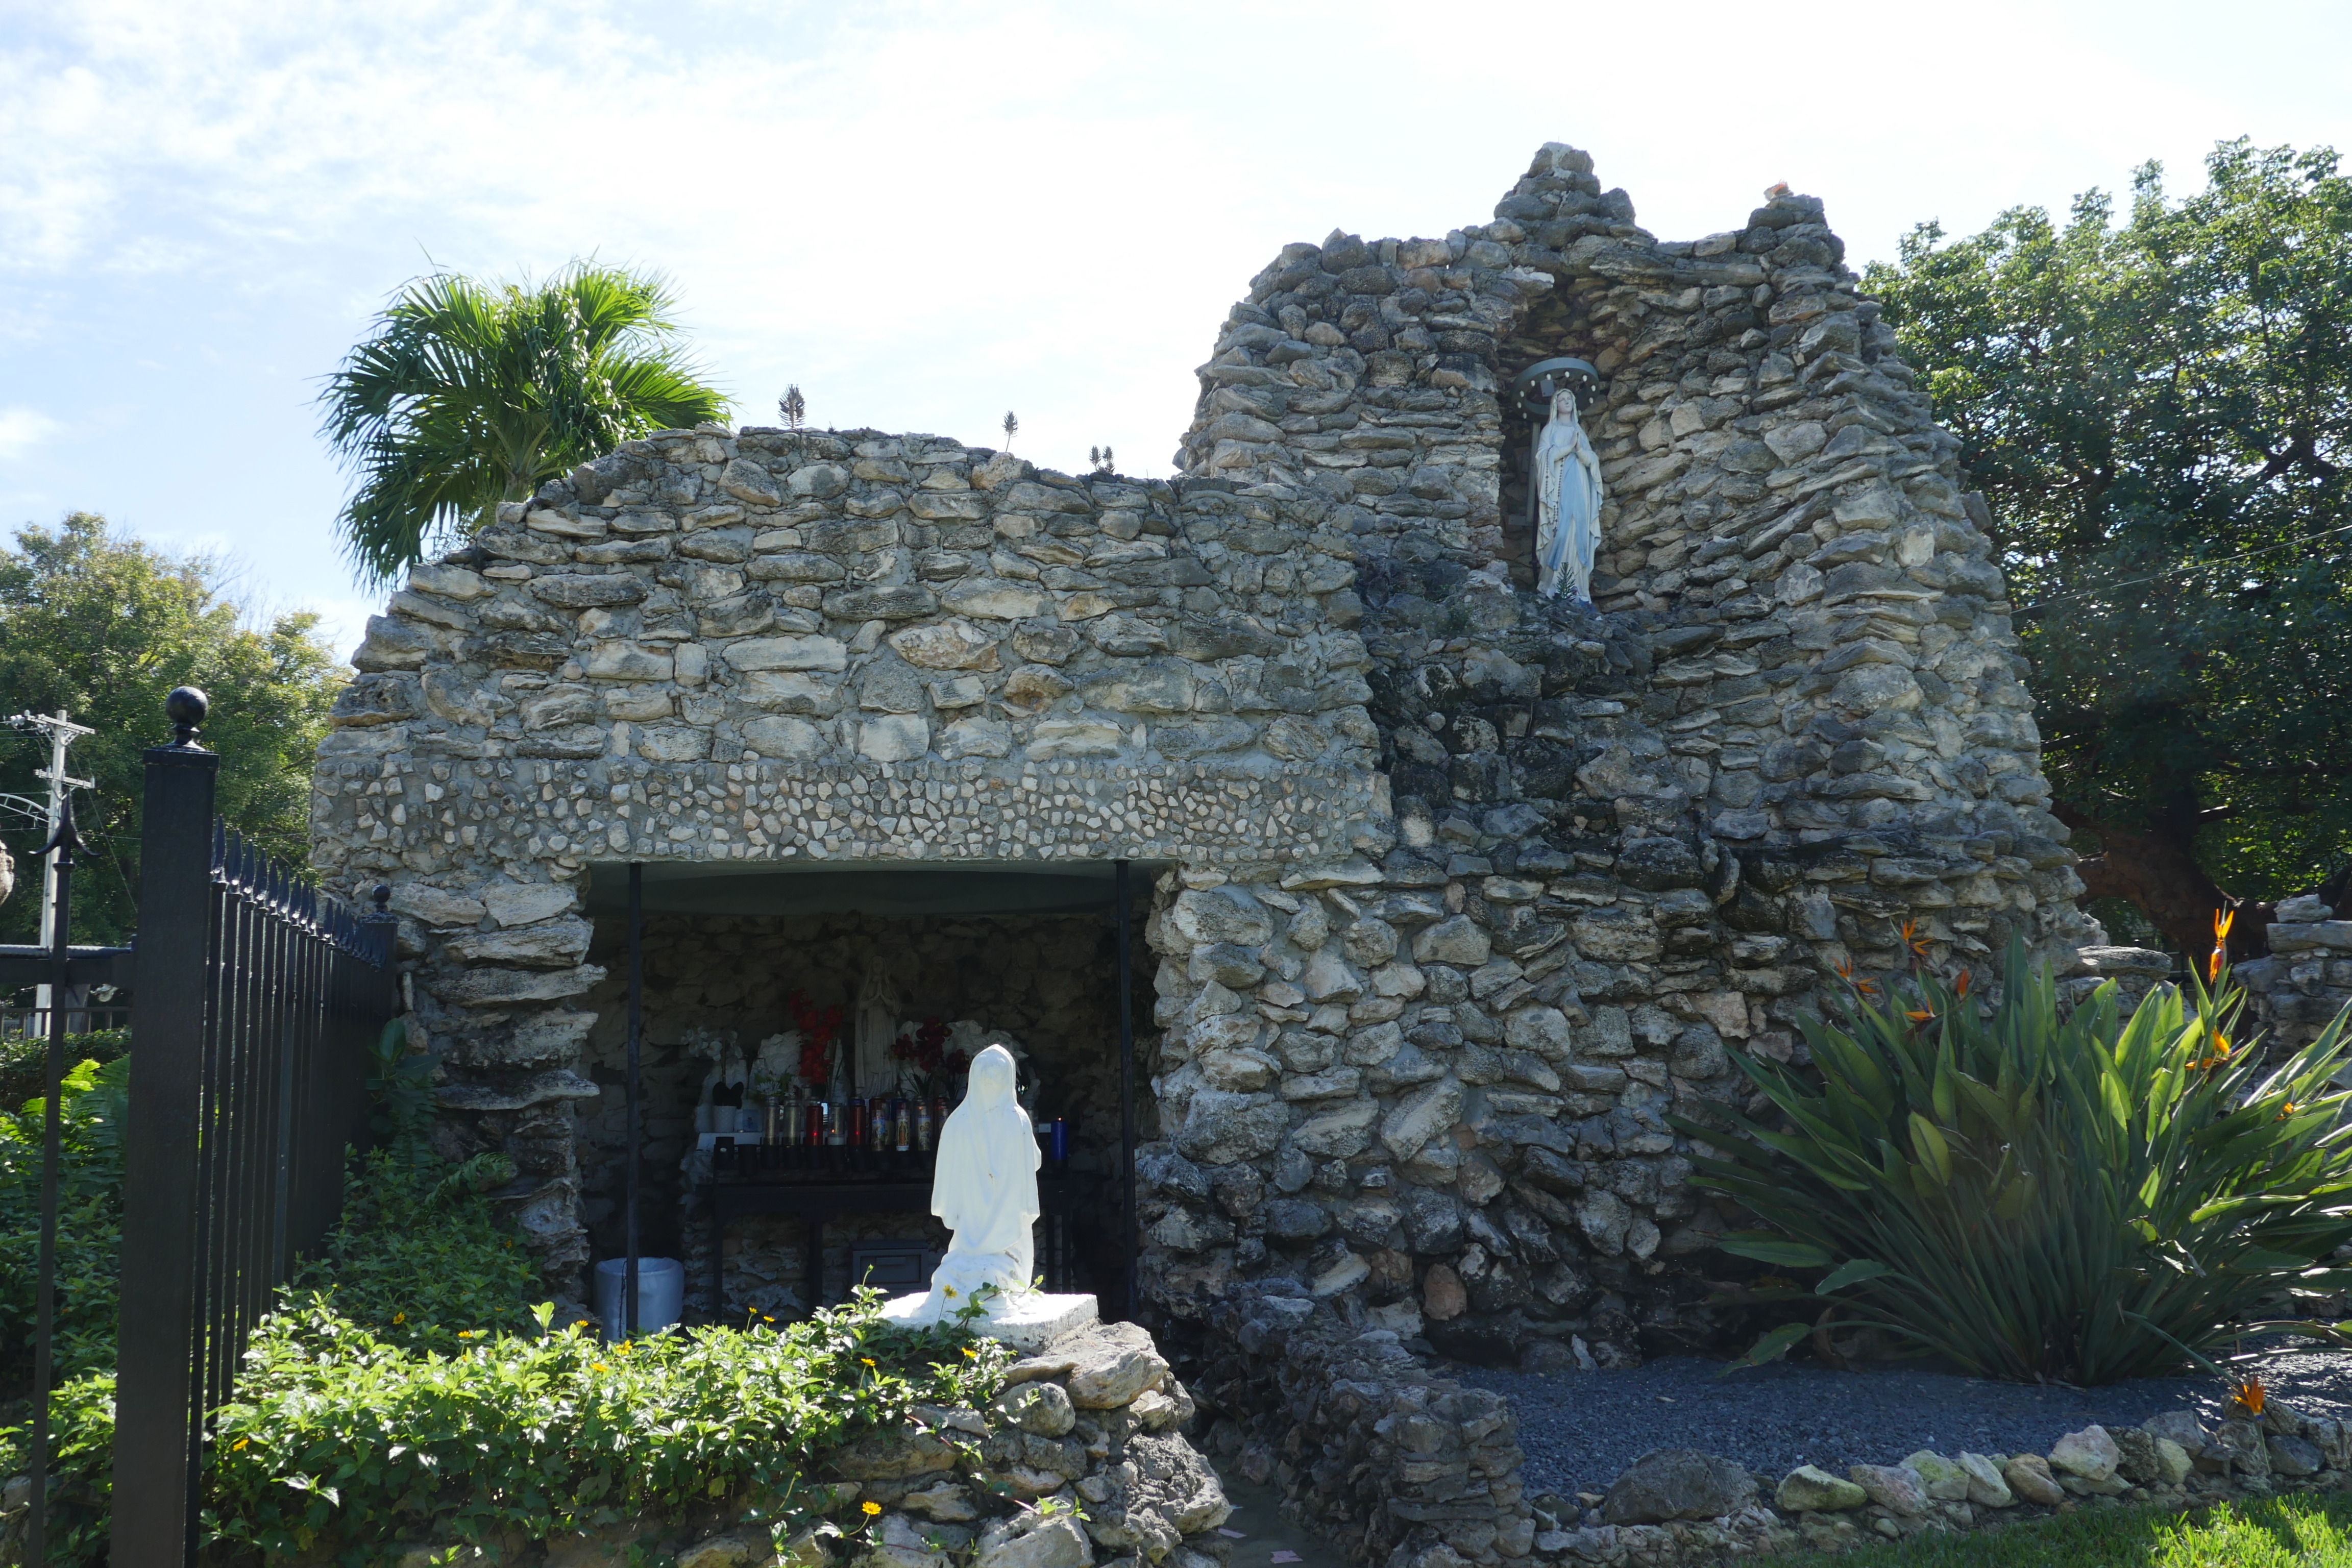 Photo of the grotto at St. Mary Basilica Star of the Sea, Key West, Florida.